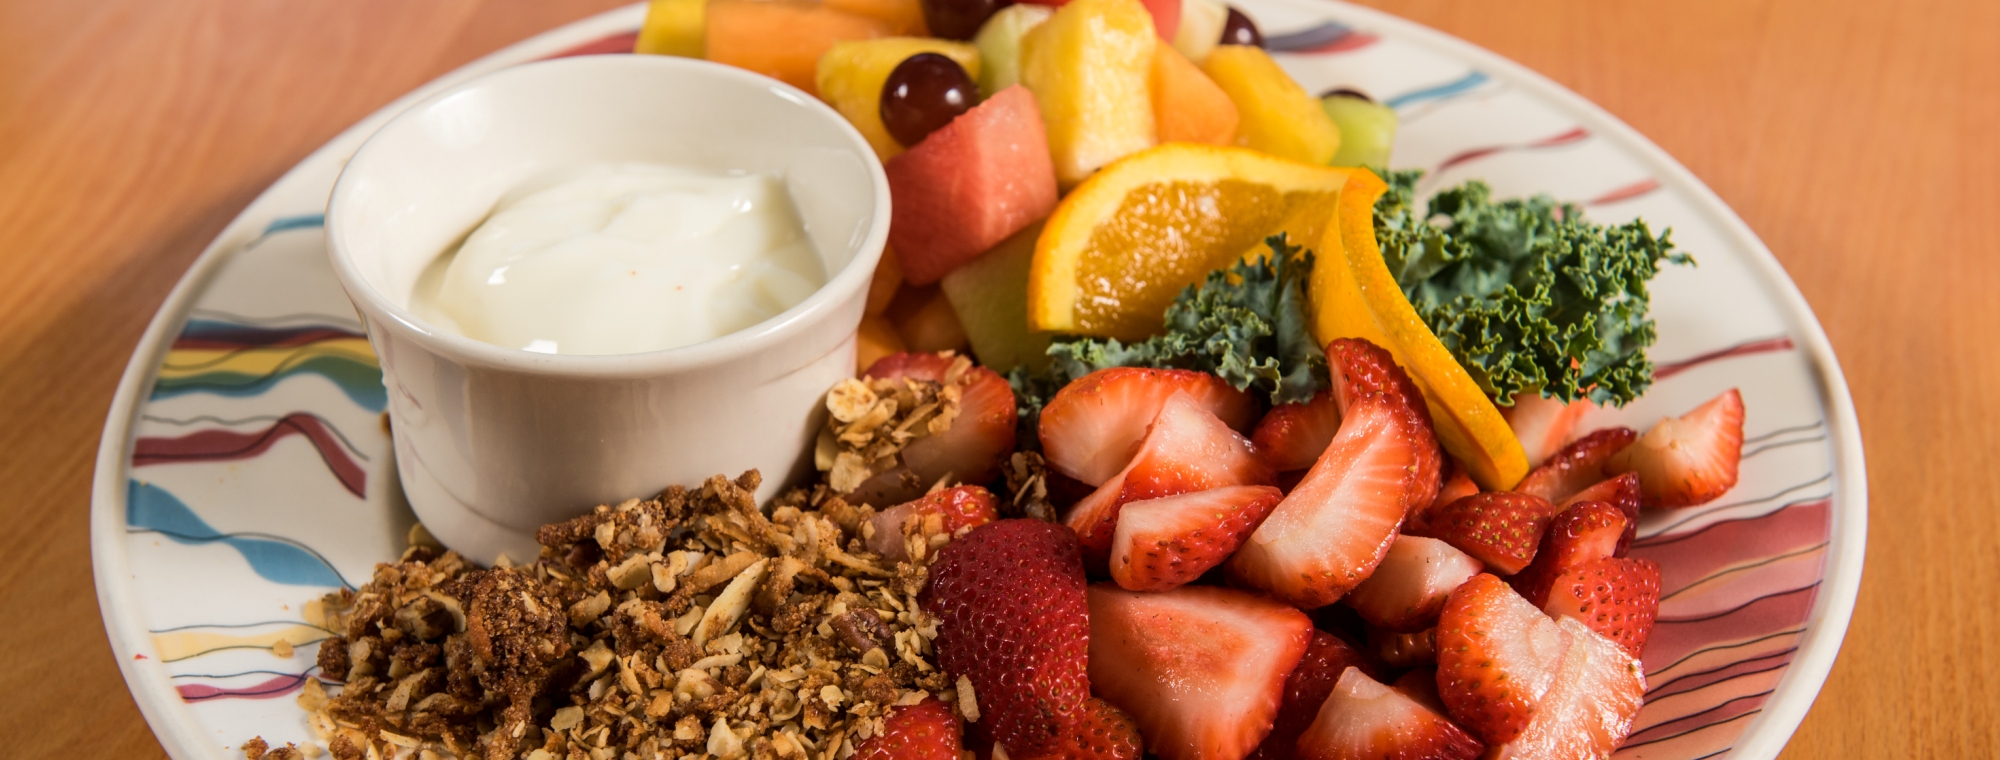 A fruit plate with granola, strawberries, oranges, melon and a garnish in Ogunquit, ME